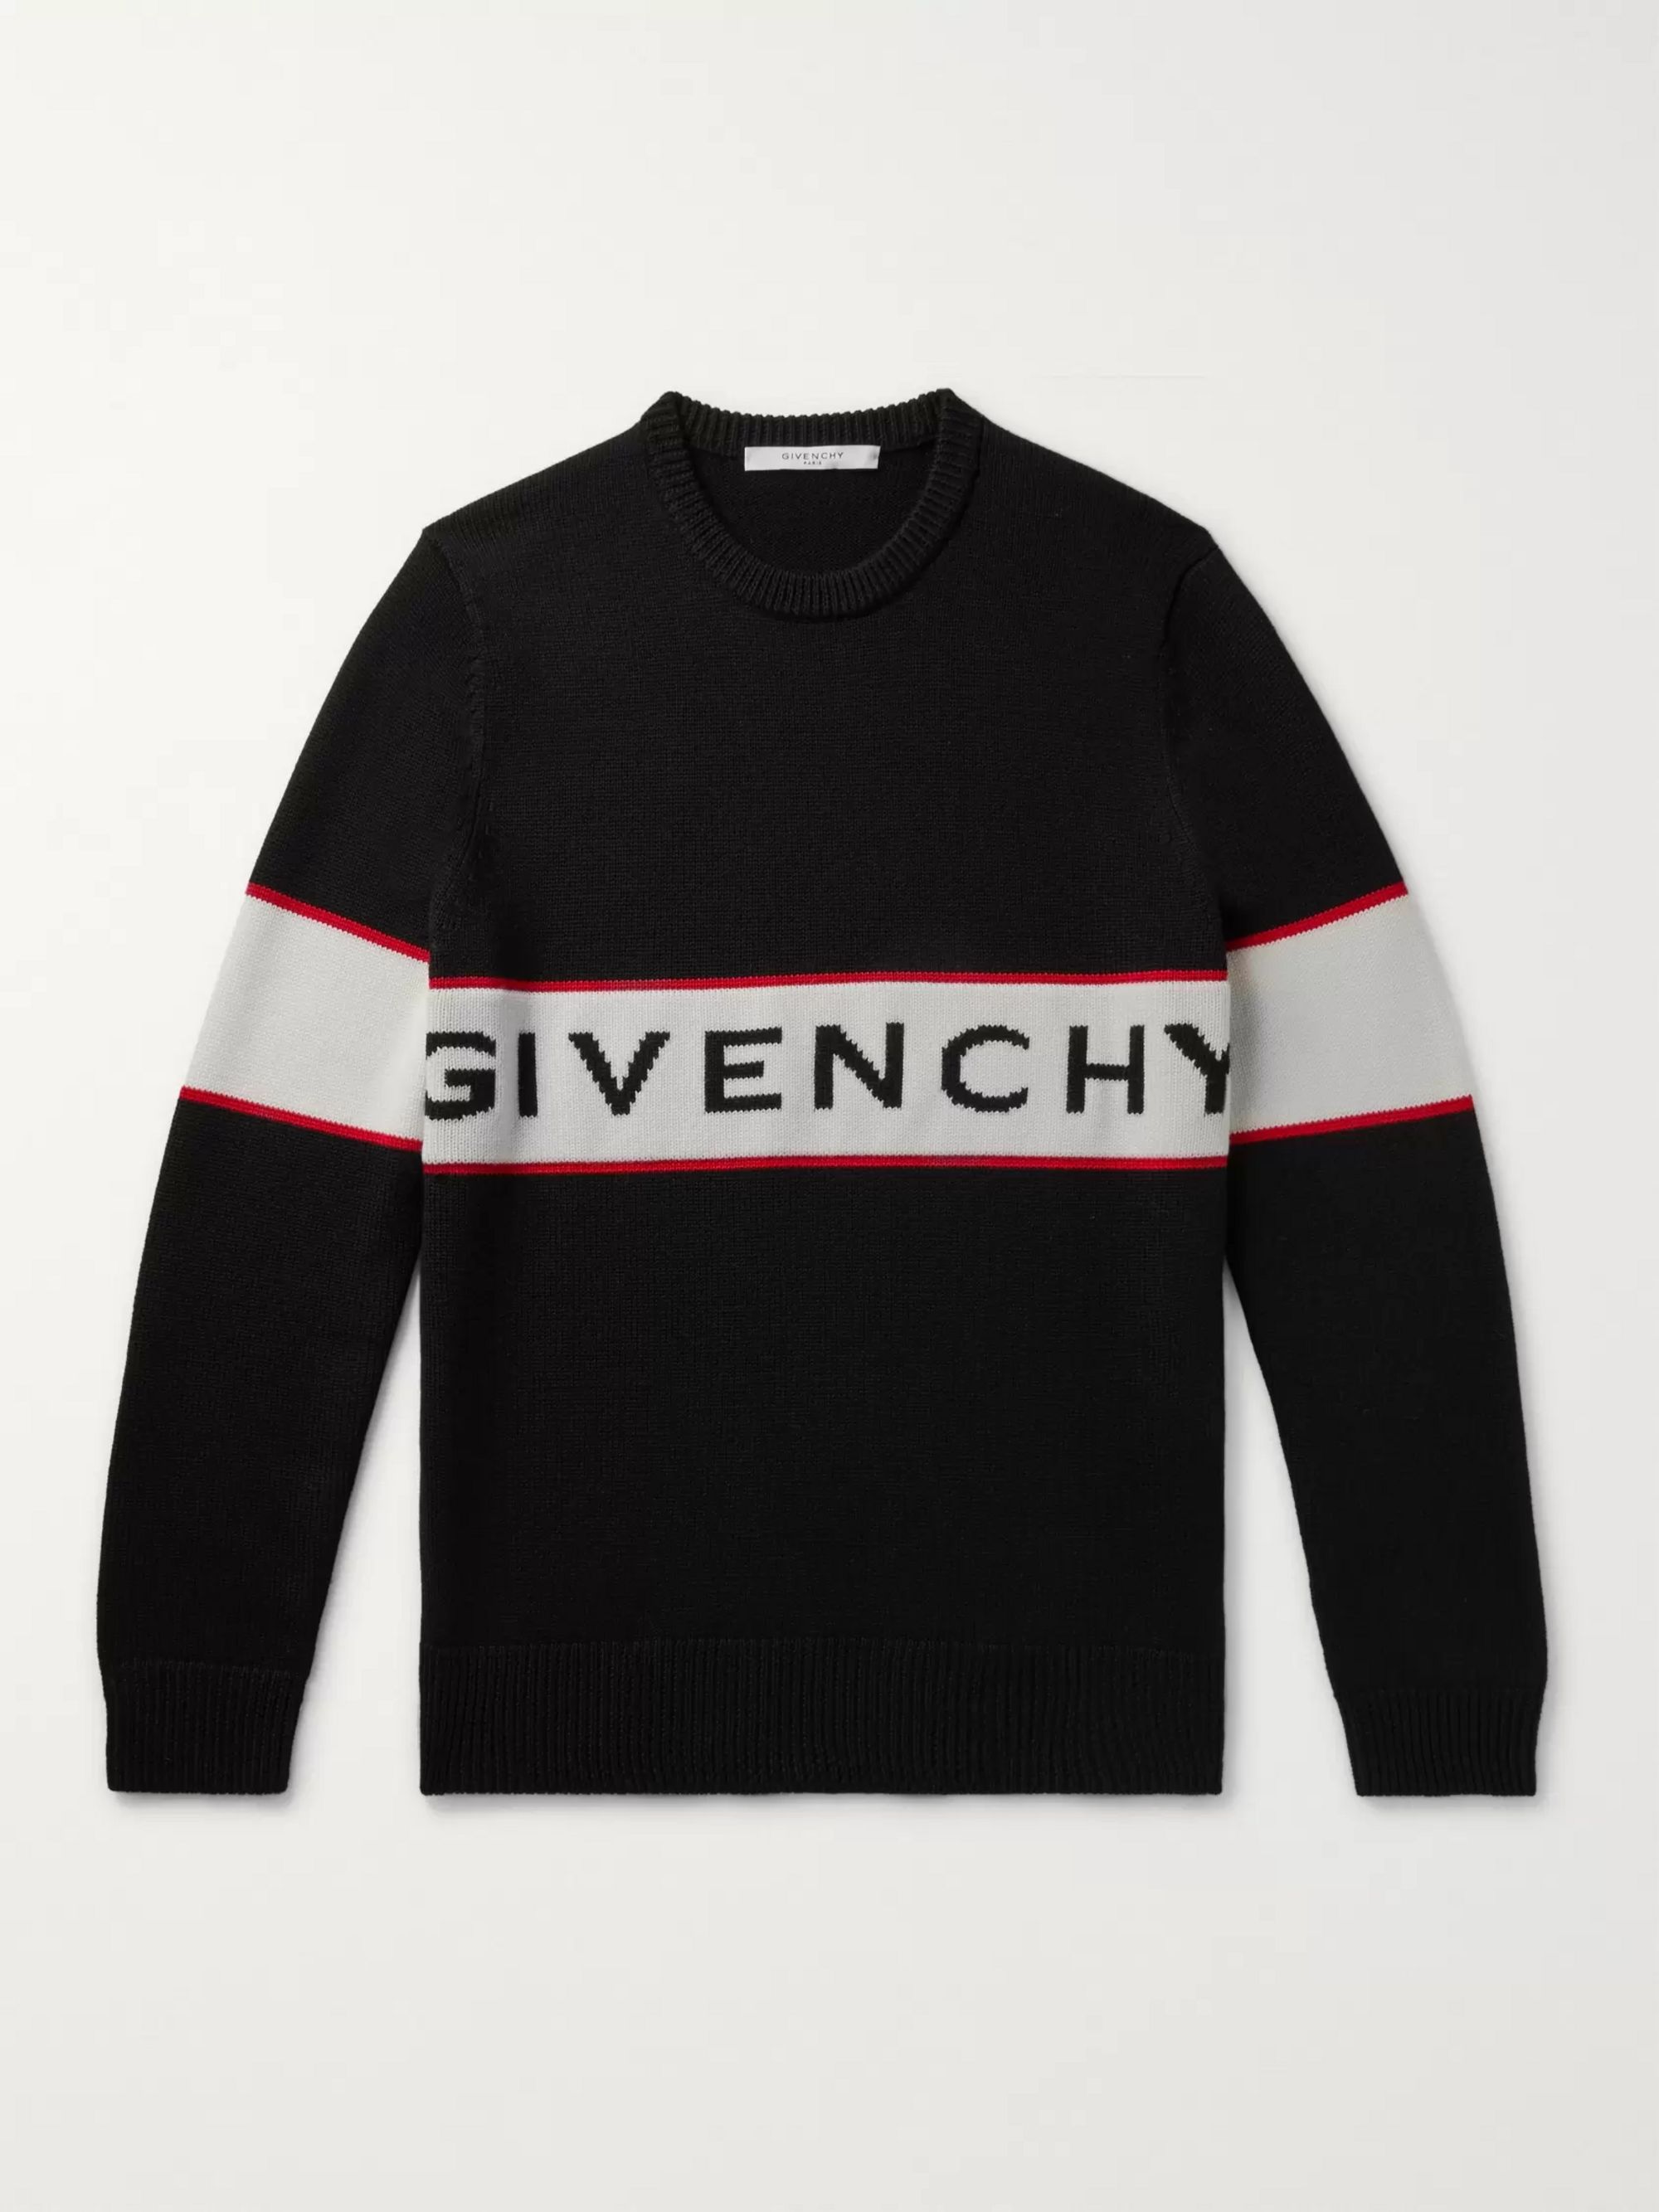 Buy > grey givenchy jumper > in stock